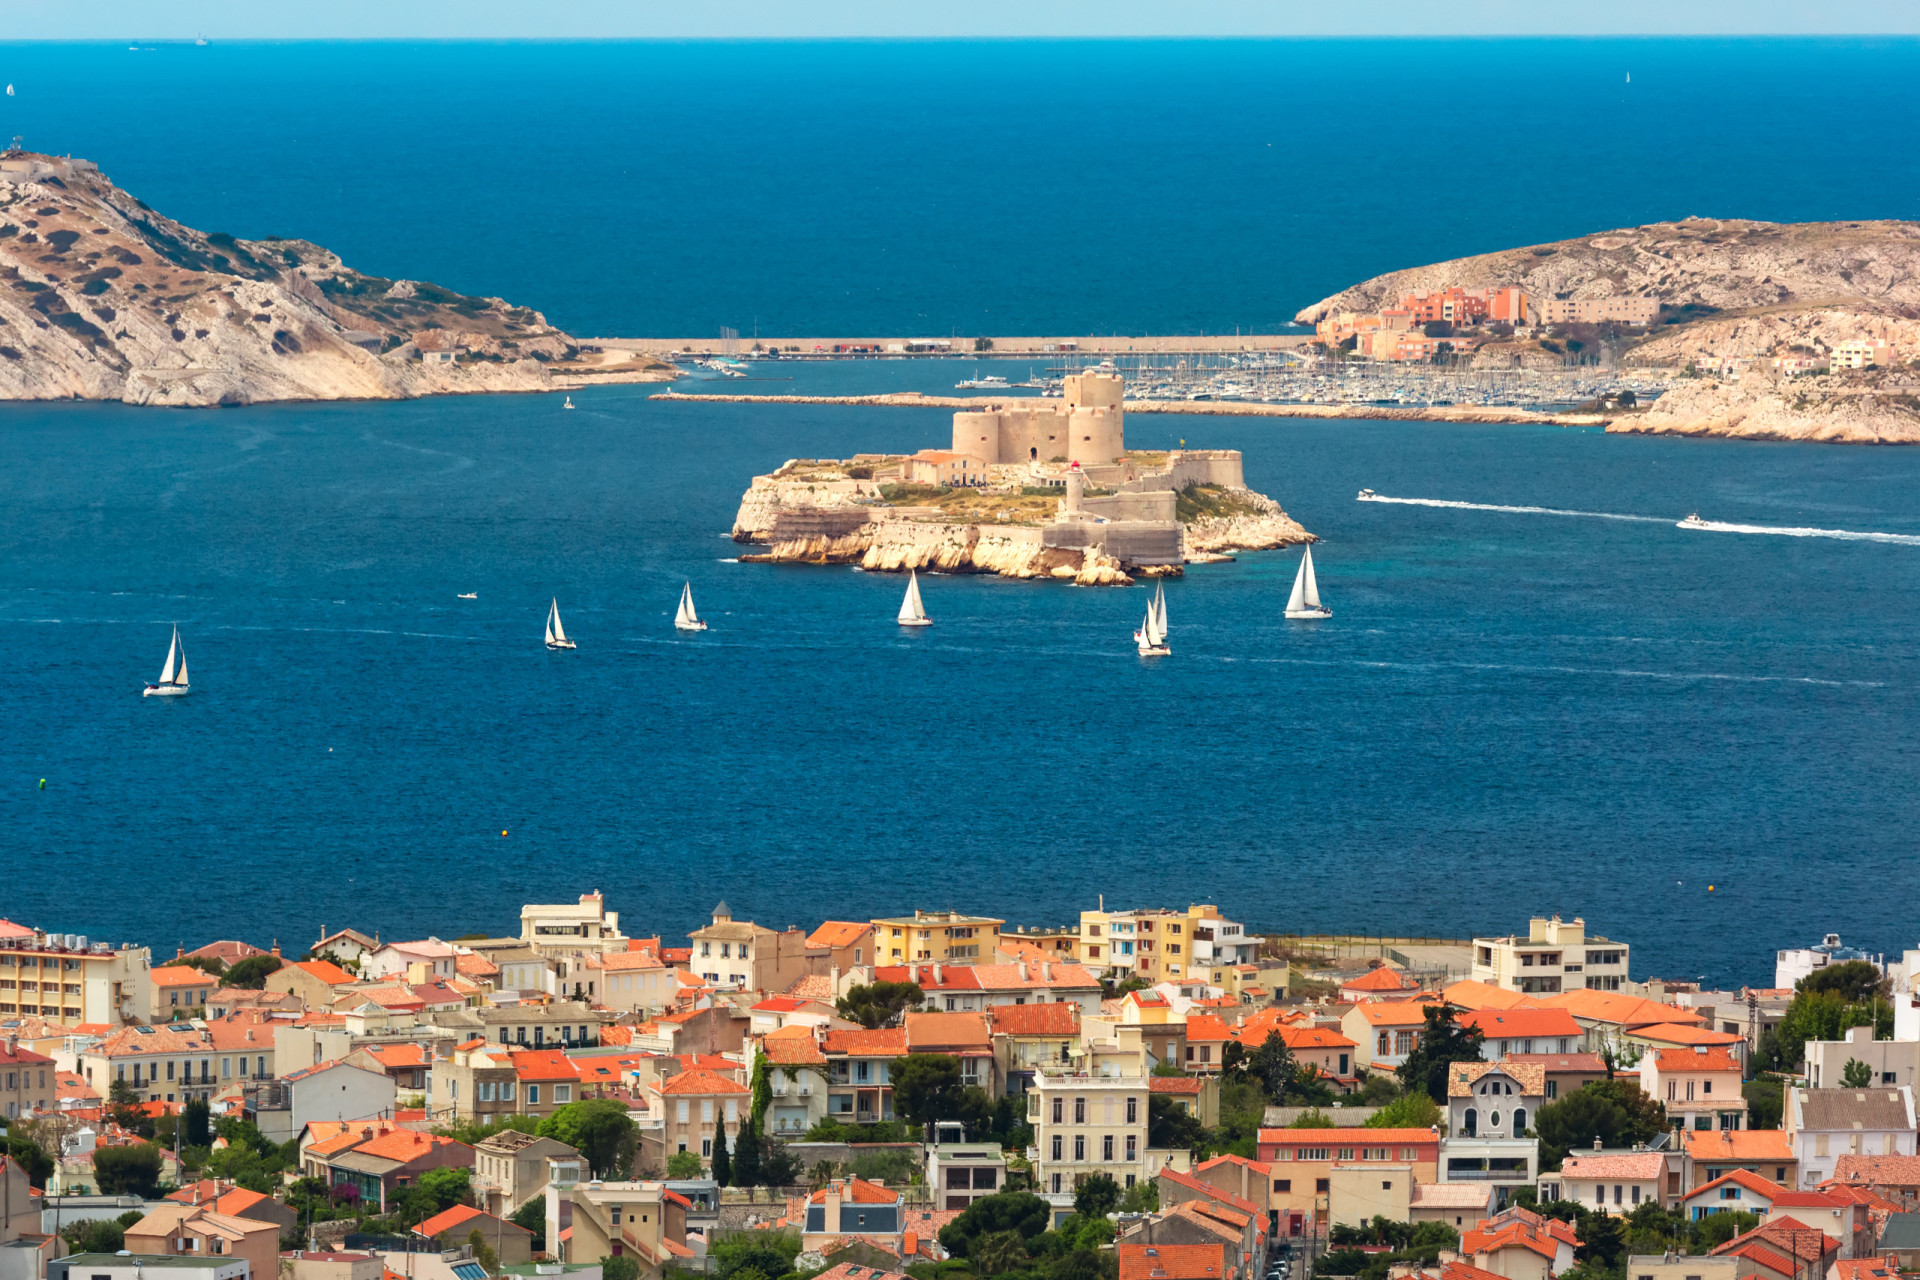 <p>Alexandre Dumas' 'The Count of Monte Cristo' introduces readers to the bustling port city of Marseille. The Château d'If, a fortress prison off the coast, plays a significant role in the story. Touring this island and the vibrant city itself allows one to delve into the intrigue and adventure of the novel.</p><p>You may also like:<a href="https://www.starsinsider.com/n/421620?utm_source=msn.com&utm_medium=display&utm_campaign=referral_description&utm_content=639745en-us"> What's so special about Leap Day?</a></p>